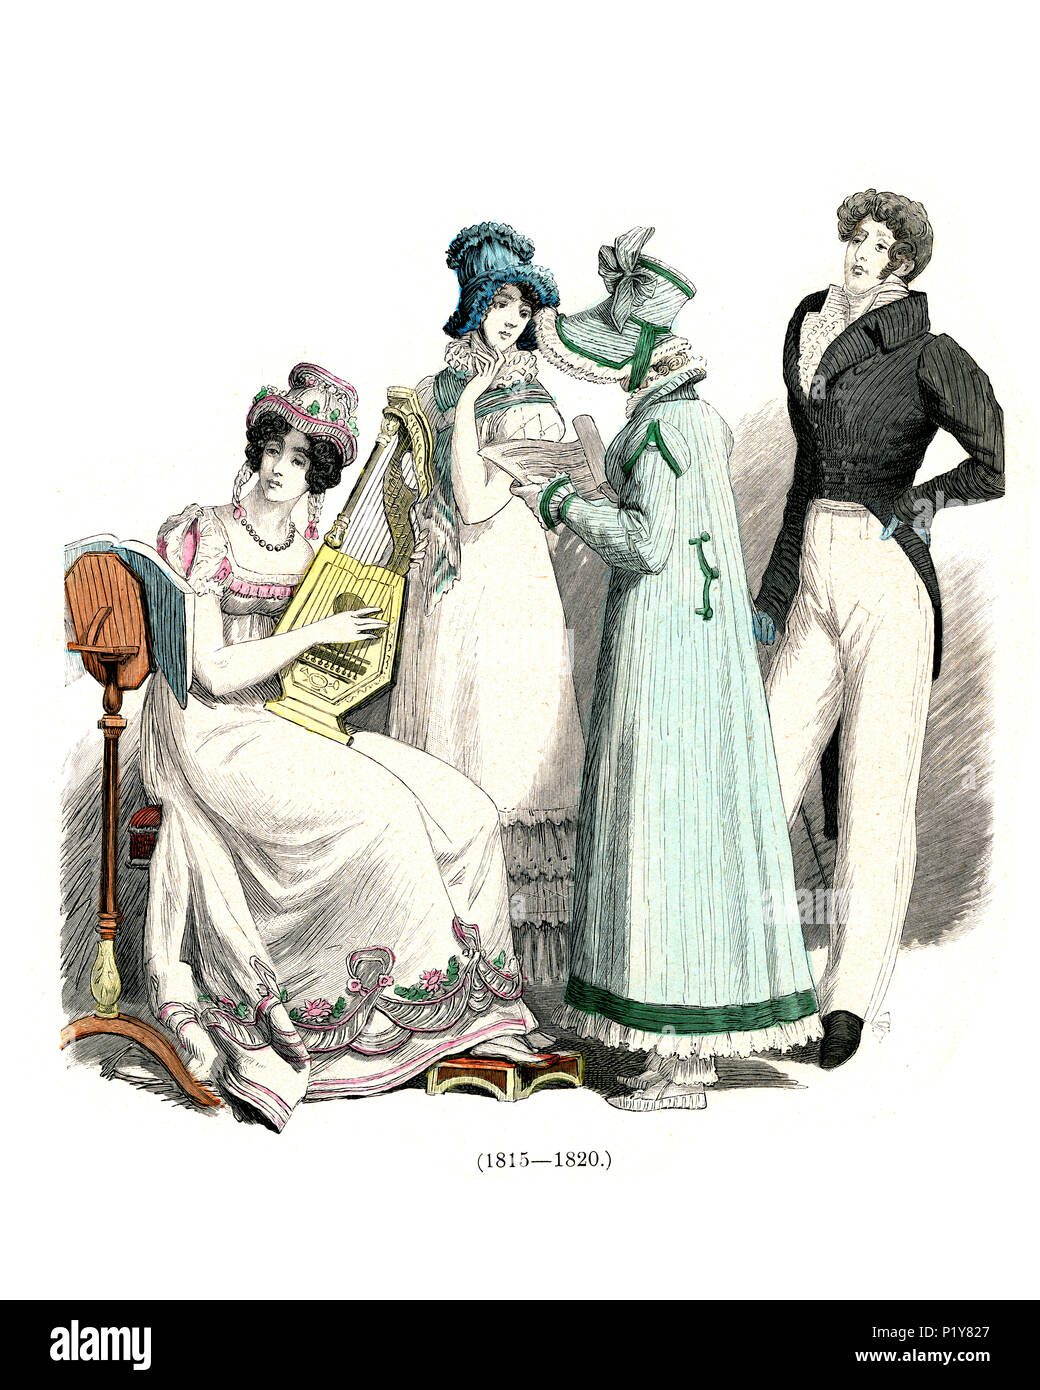 Vintage engraving of History of Fashion, Costumes of Germany early 19th Century. High society mens and womens costumes, 1815 to 1820 Stock Photo